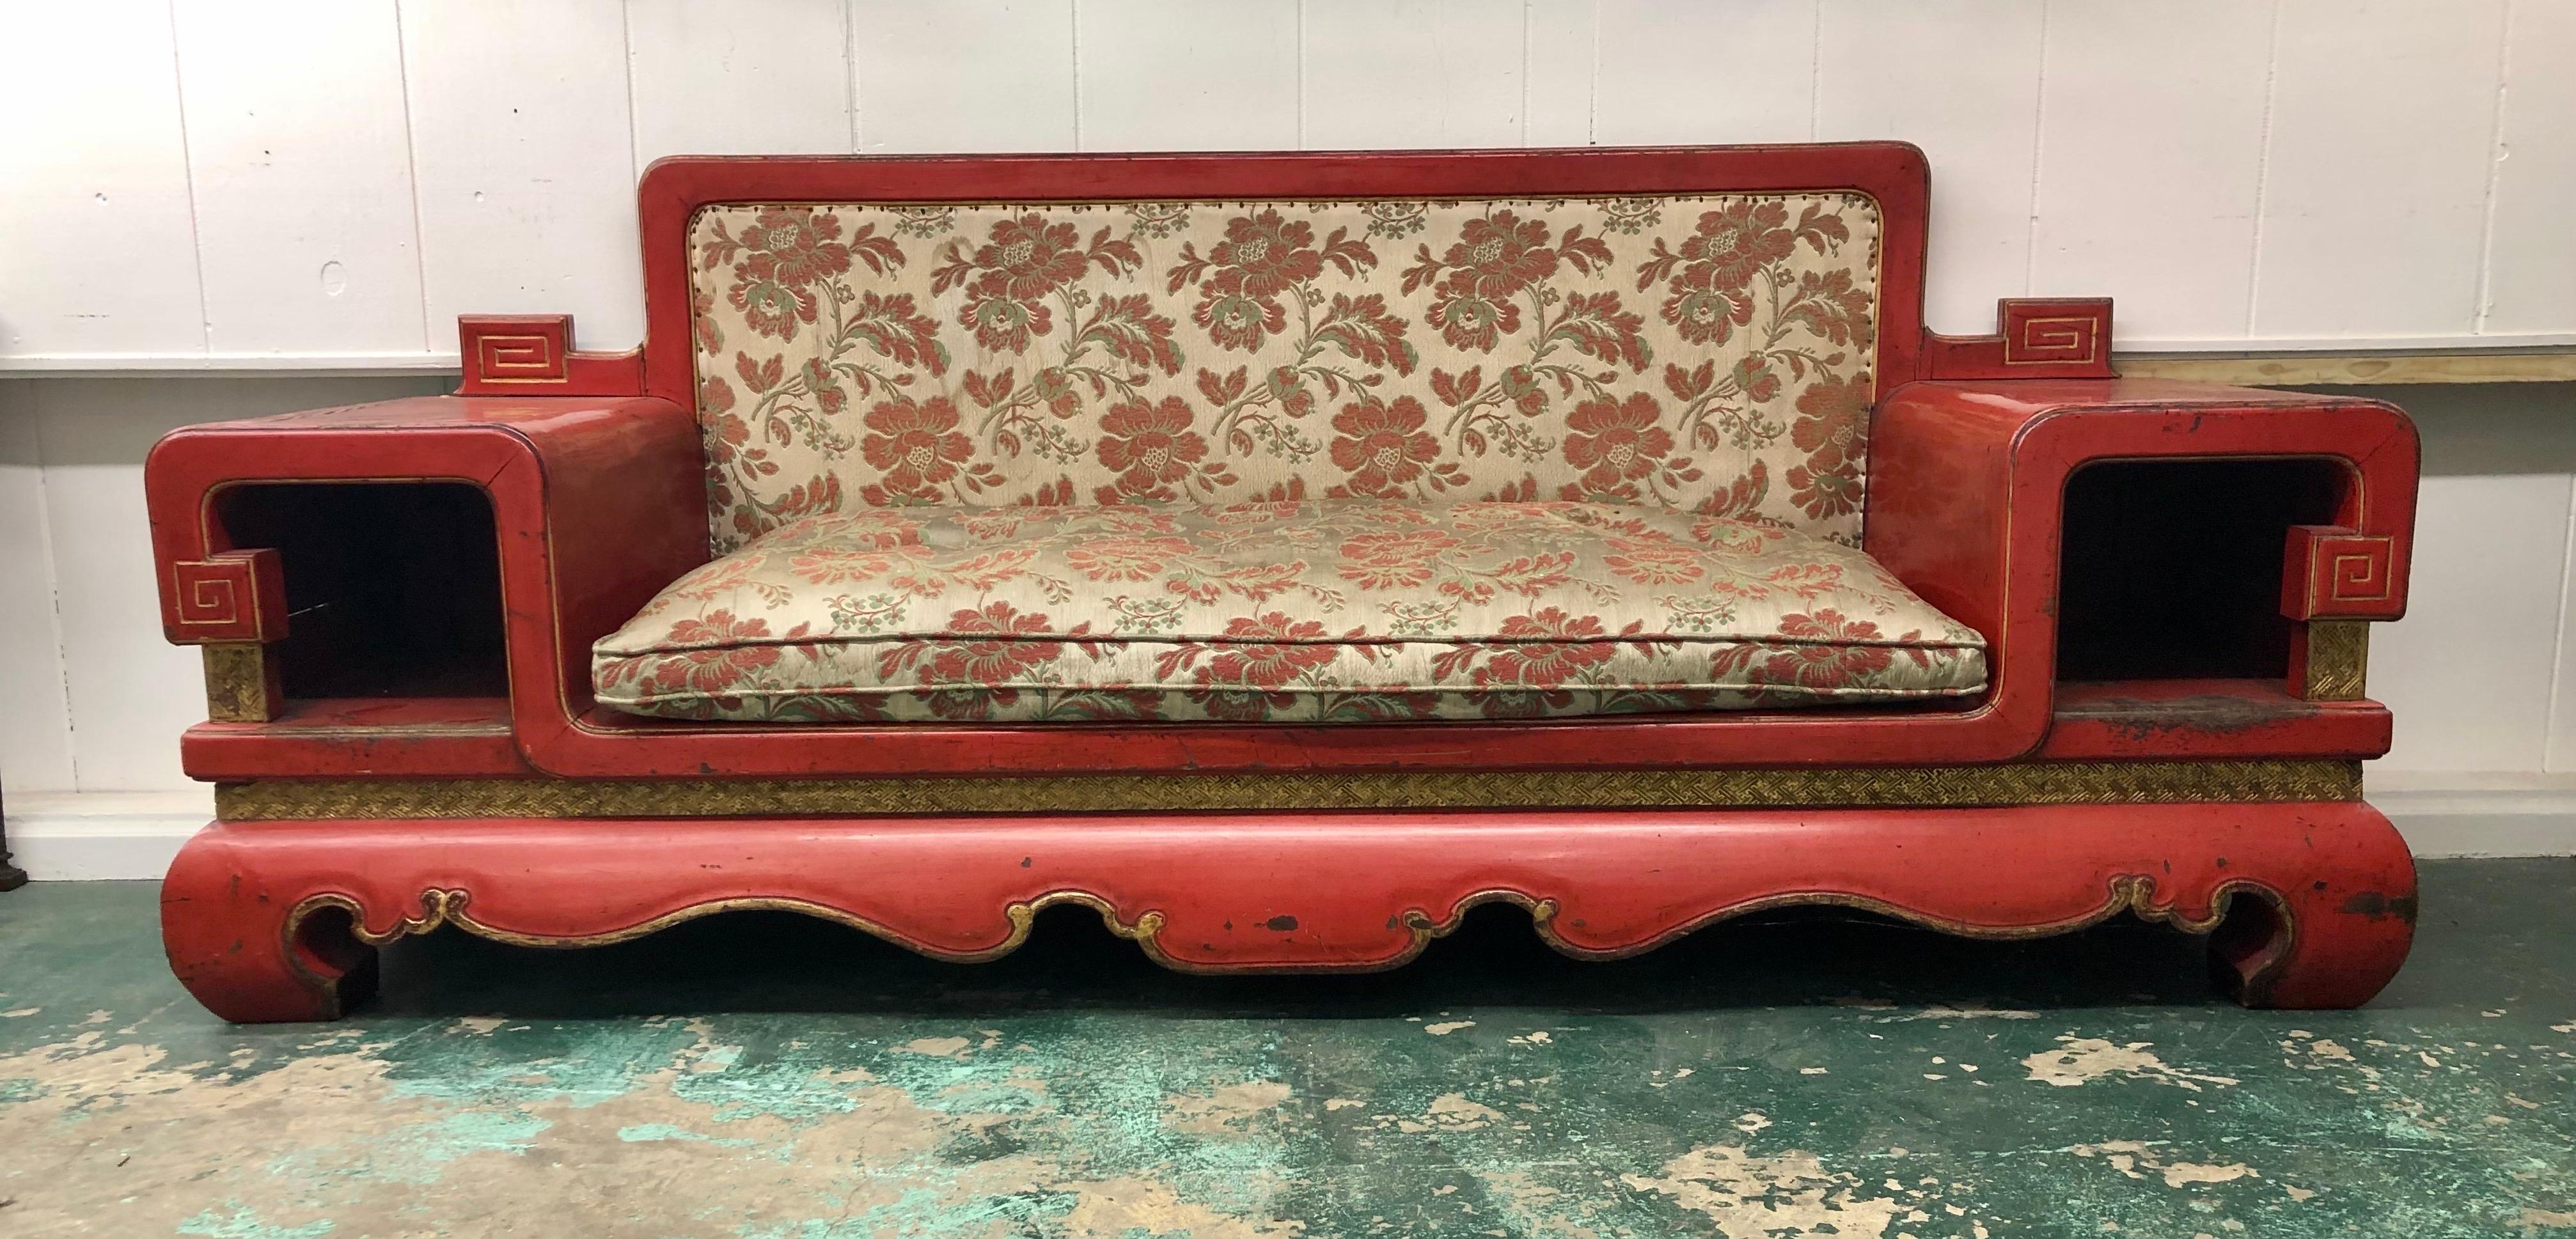 This Imperial red Lacquer Chinese bench with gilt highlights was made in the late Nineteenth Century during the late Qing Dynasty. The Aesthetic Movement Chinese sofa is handmade using intricate Chinese joinery. The Chinese Bench comes in two parts